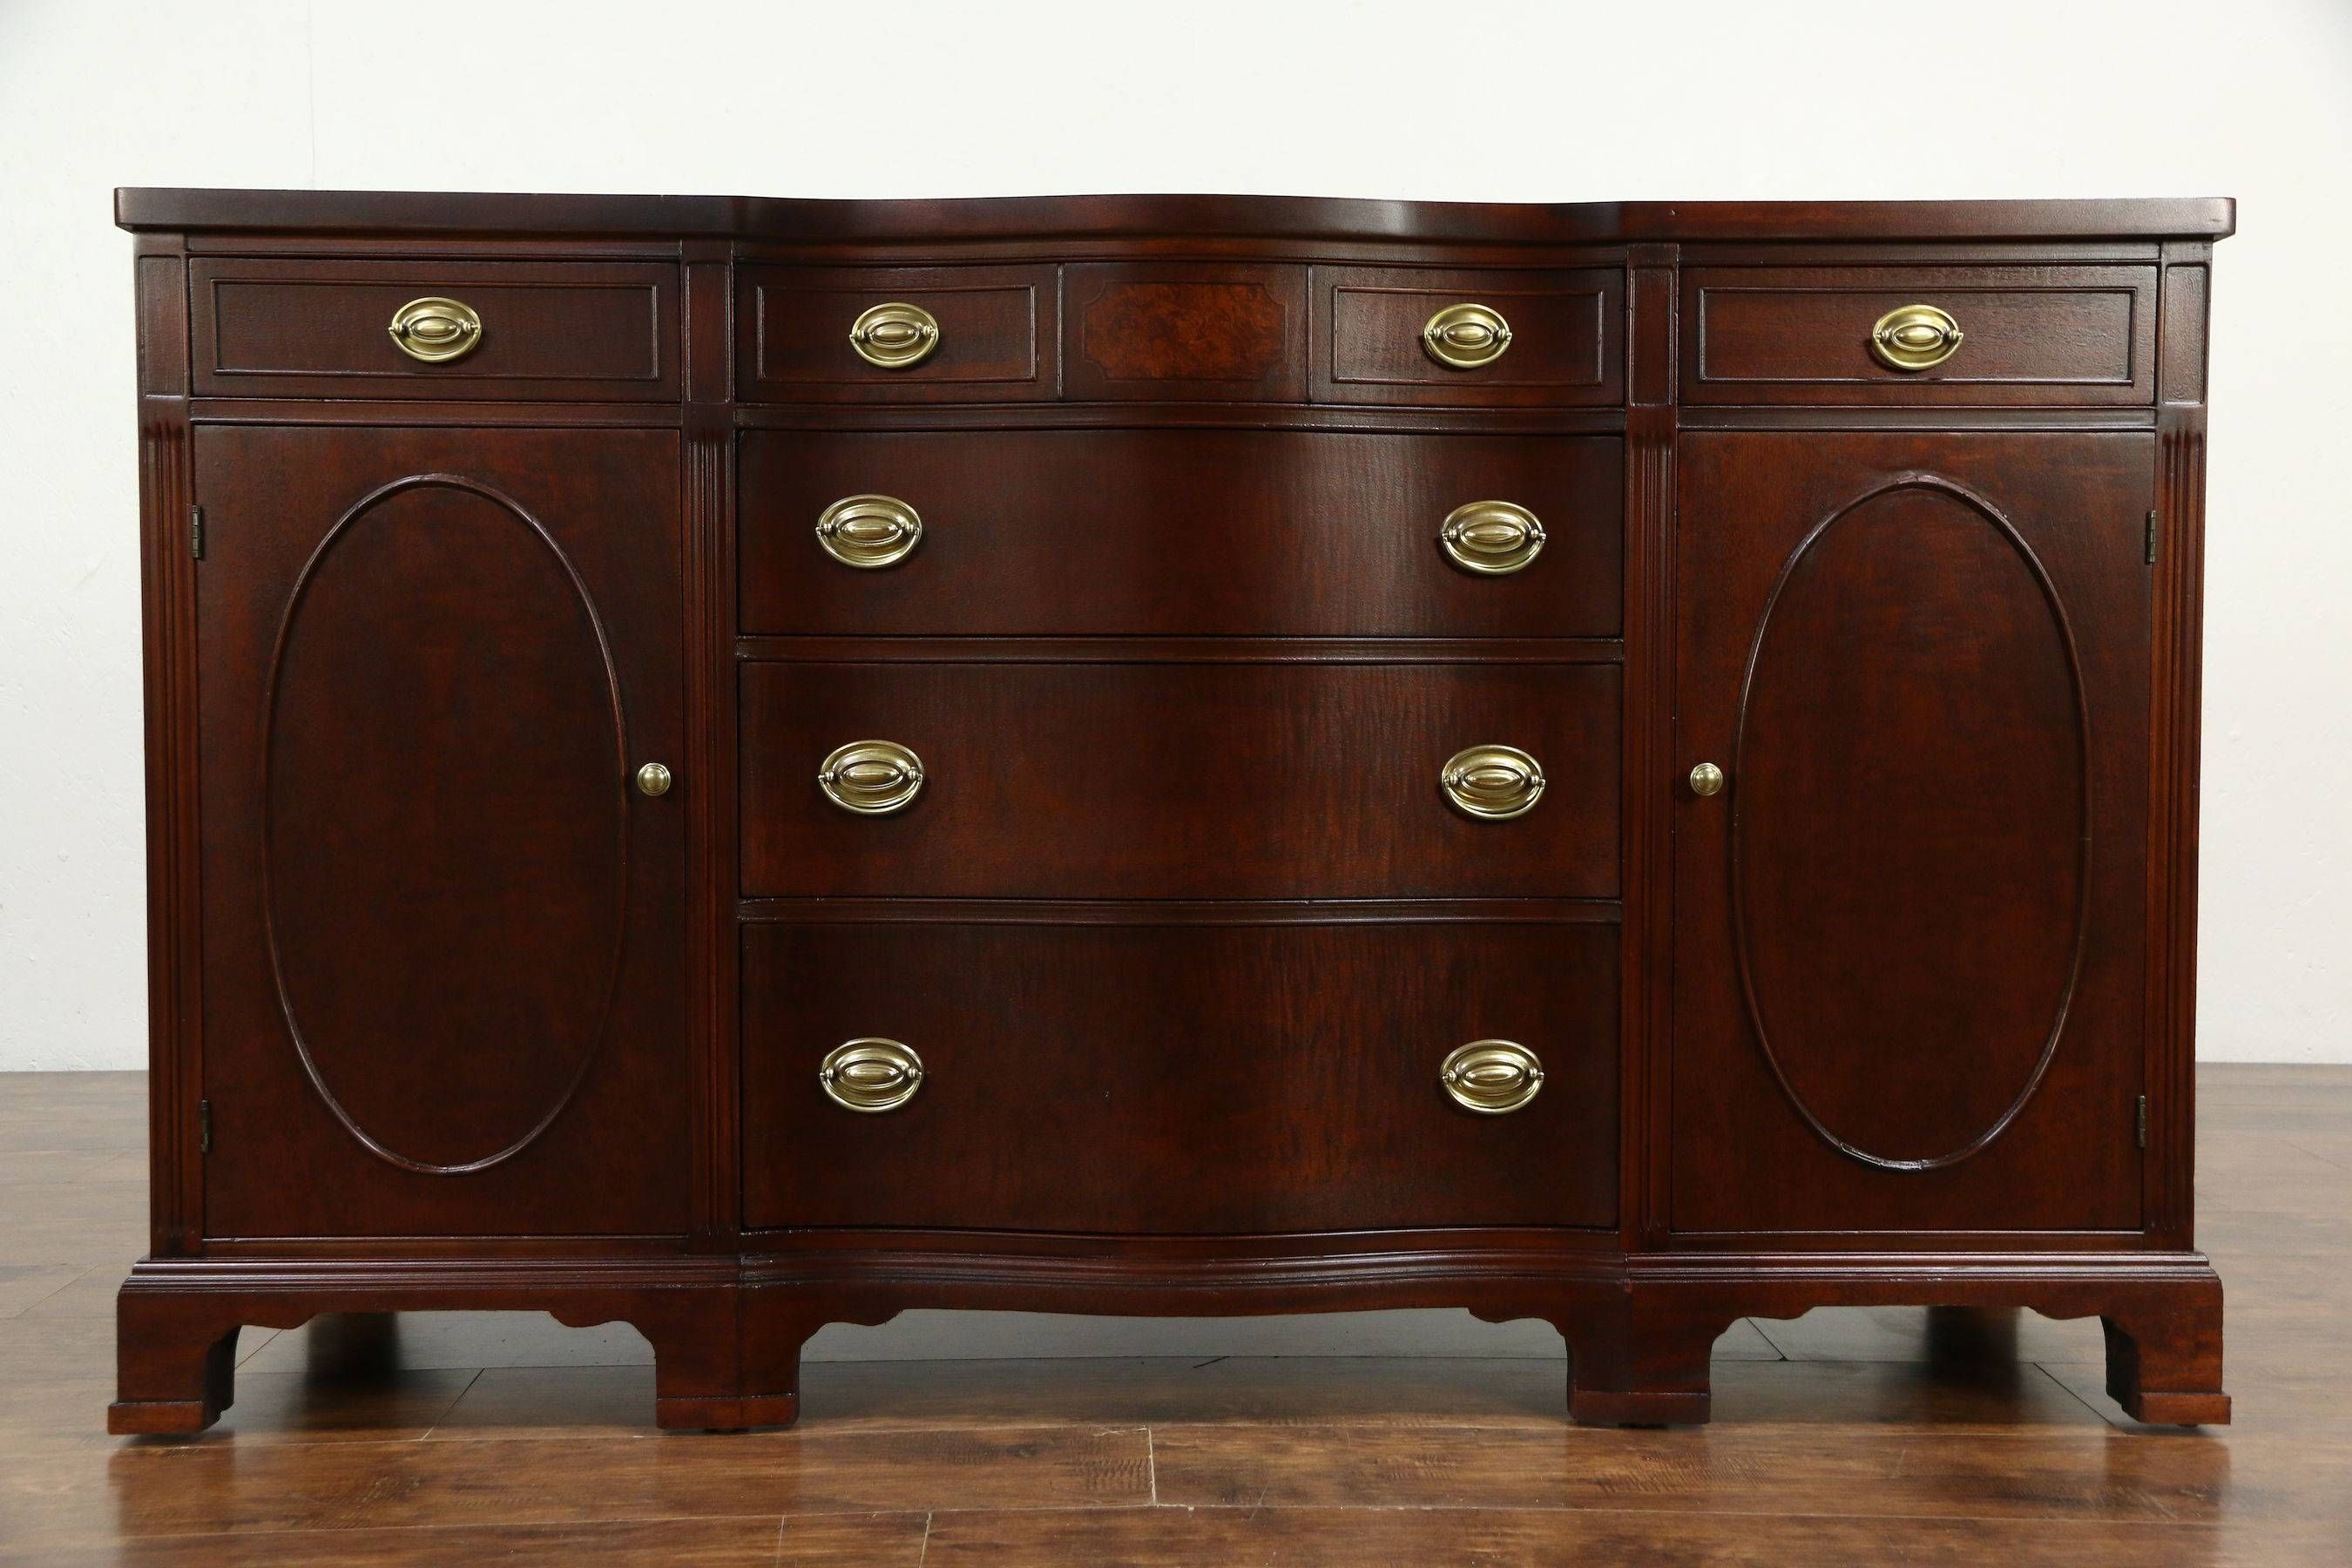 Traditional Mahogany 1950 Vintage Sideboard, Server Or Buffet Intended For Traditional Sideboards (View 6 of 30)